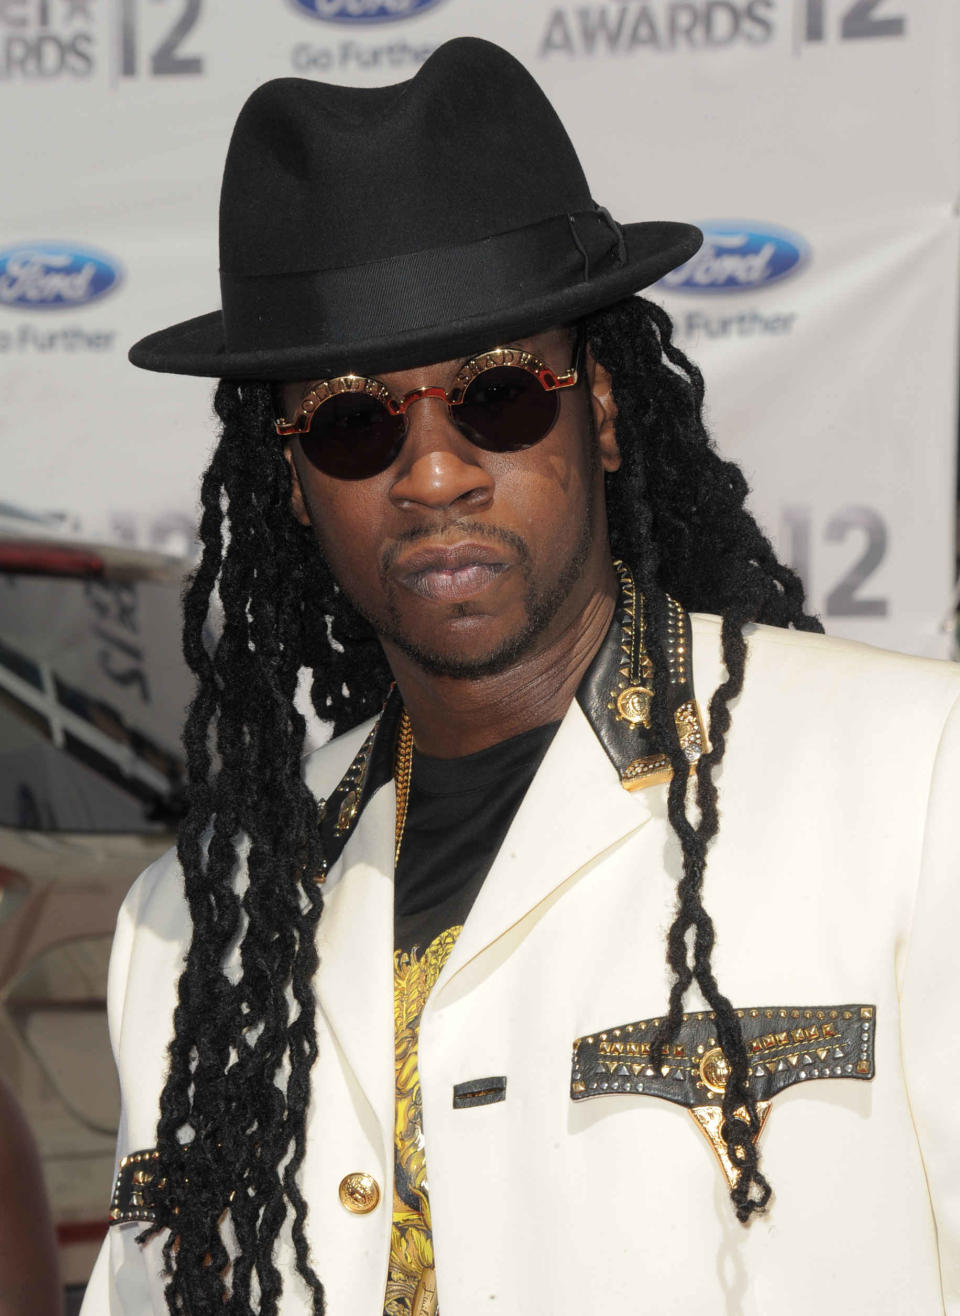 Tauheed Epps, known as 2 Chainz, arrives at the BET Awards on Sunday, July 1, 2012, in Los Angeles. (Photo by Jordan Strauss/Invision/AP)